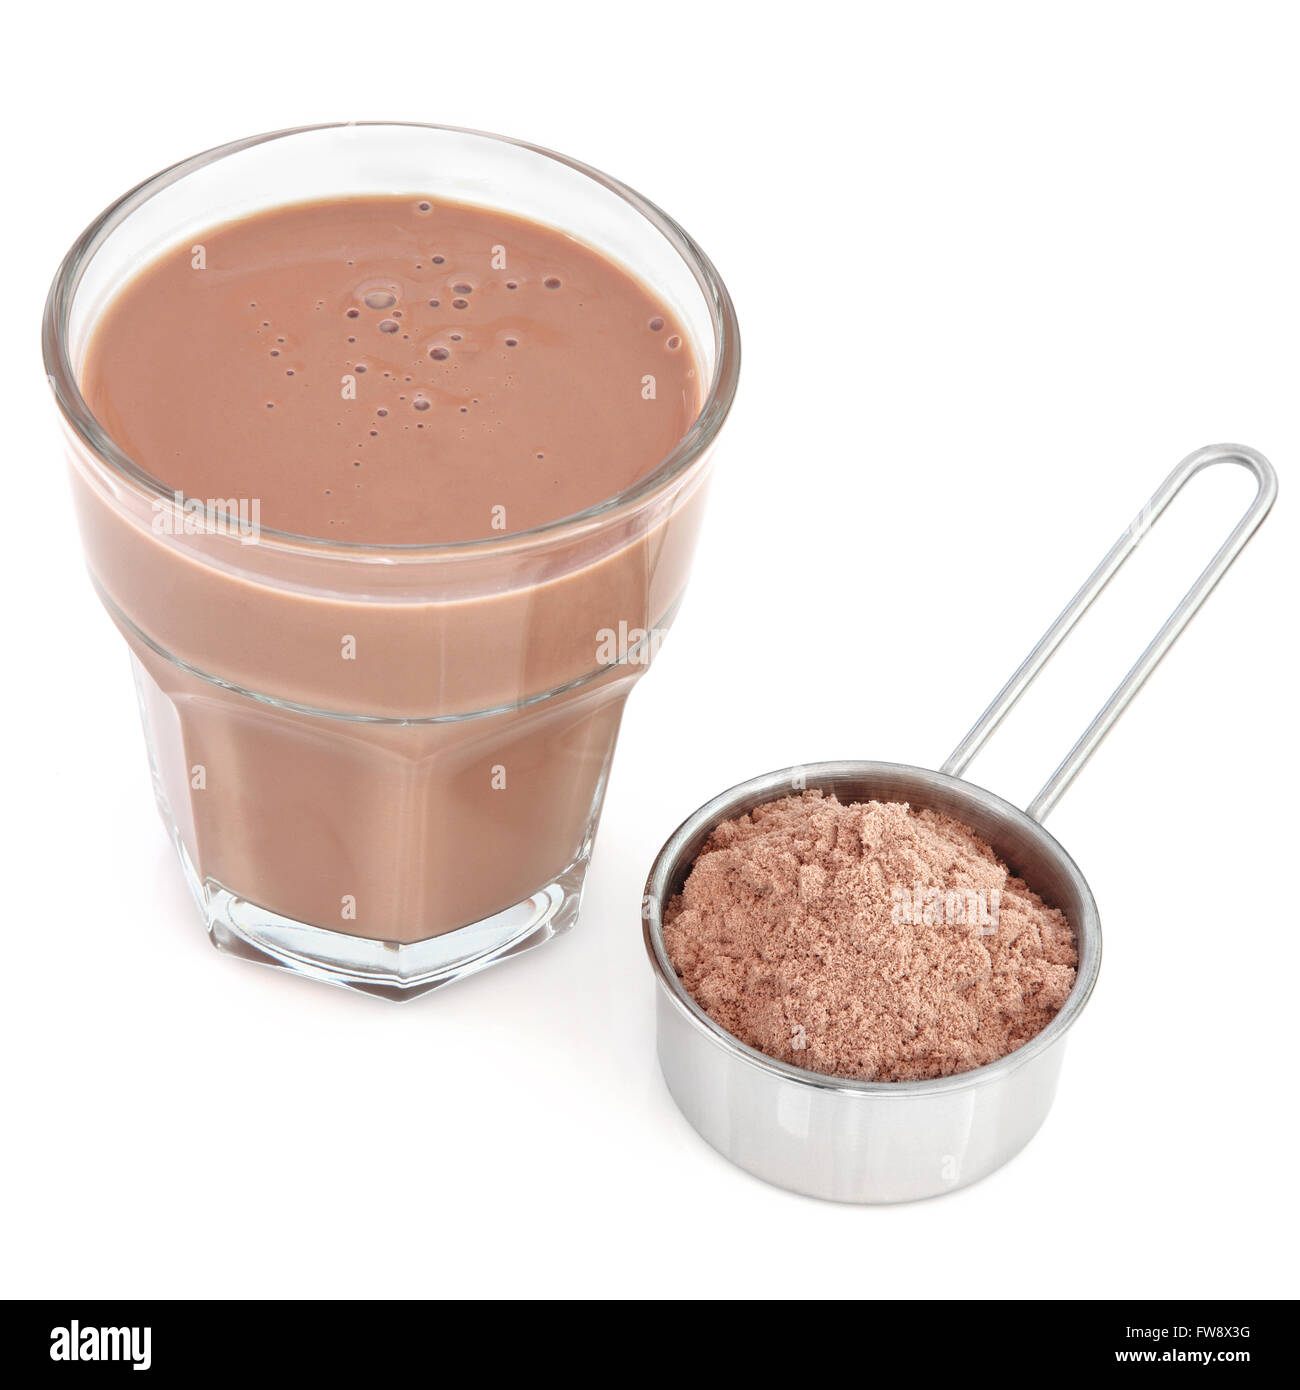 https://c8.alamy.com/comp/FW8X3G/chocolate-whey-protein-drink-with-powder-in-a-metal-measuring-scoop-FW8X3G.jpg